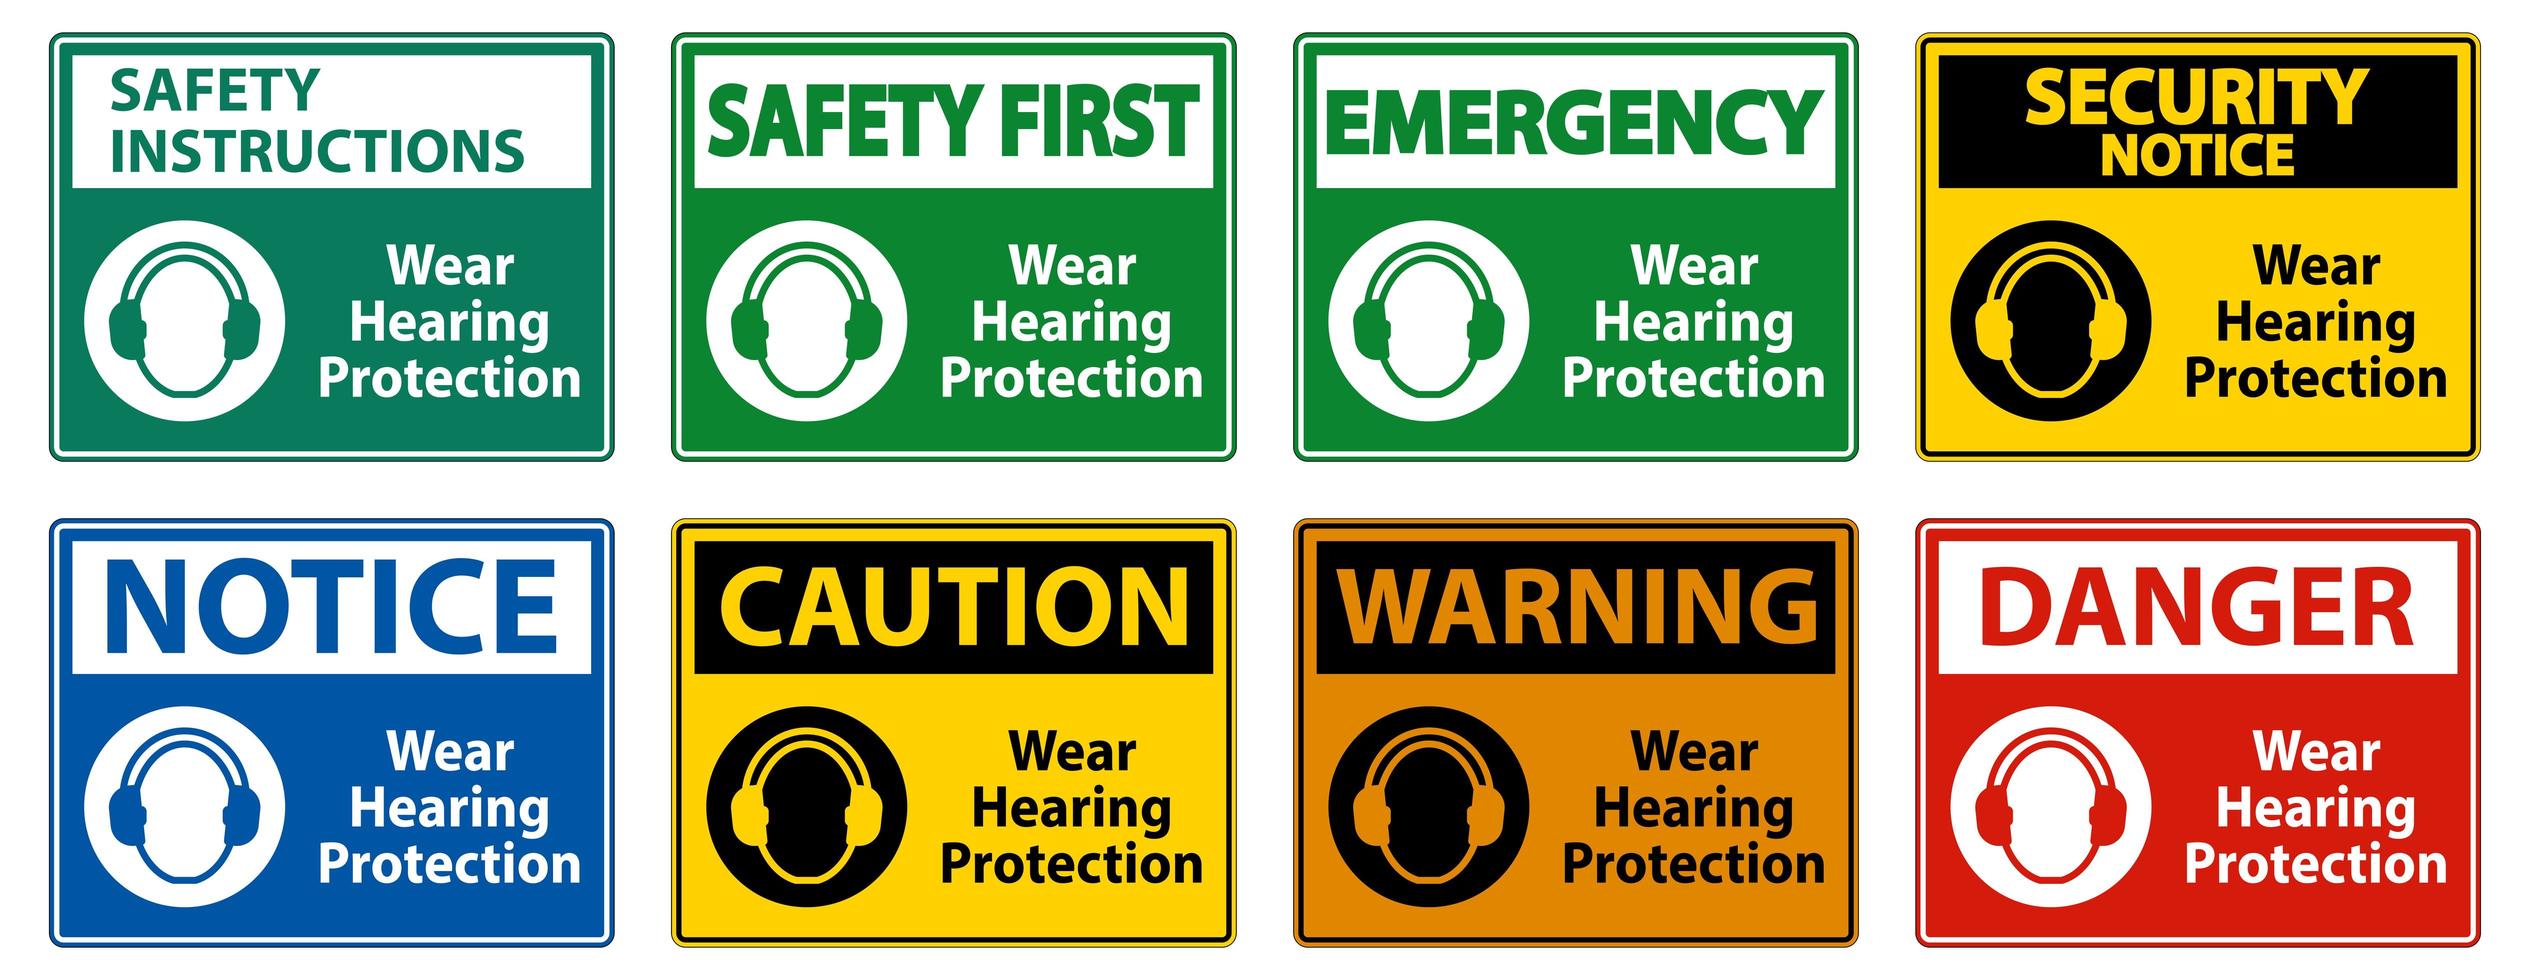 Wear hearing protection signs  vector